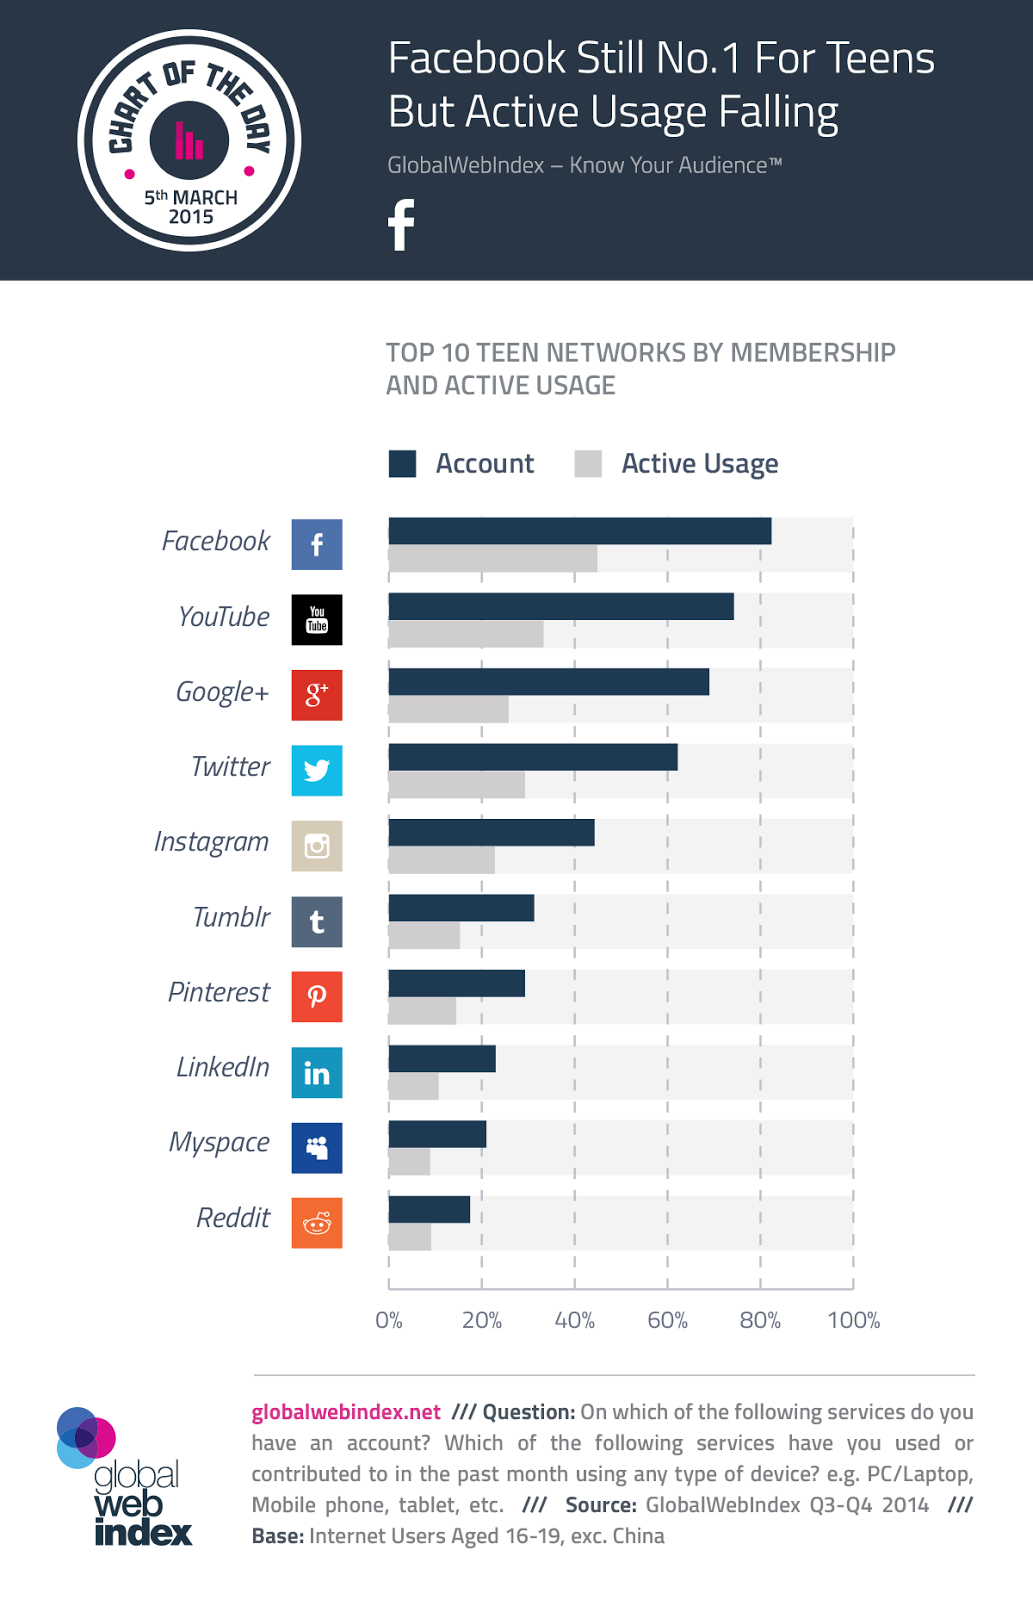 #Facebook remains the top #socialmedia platform among 16-19s. However, its popularity is falling - #infographic